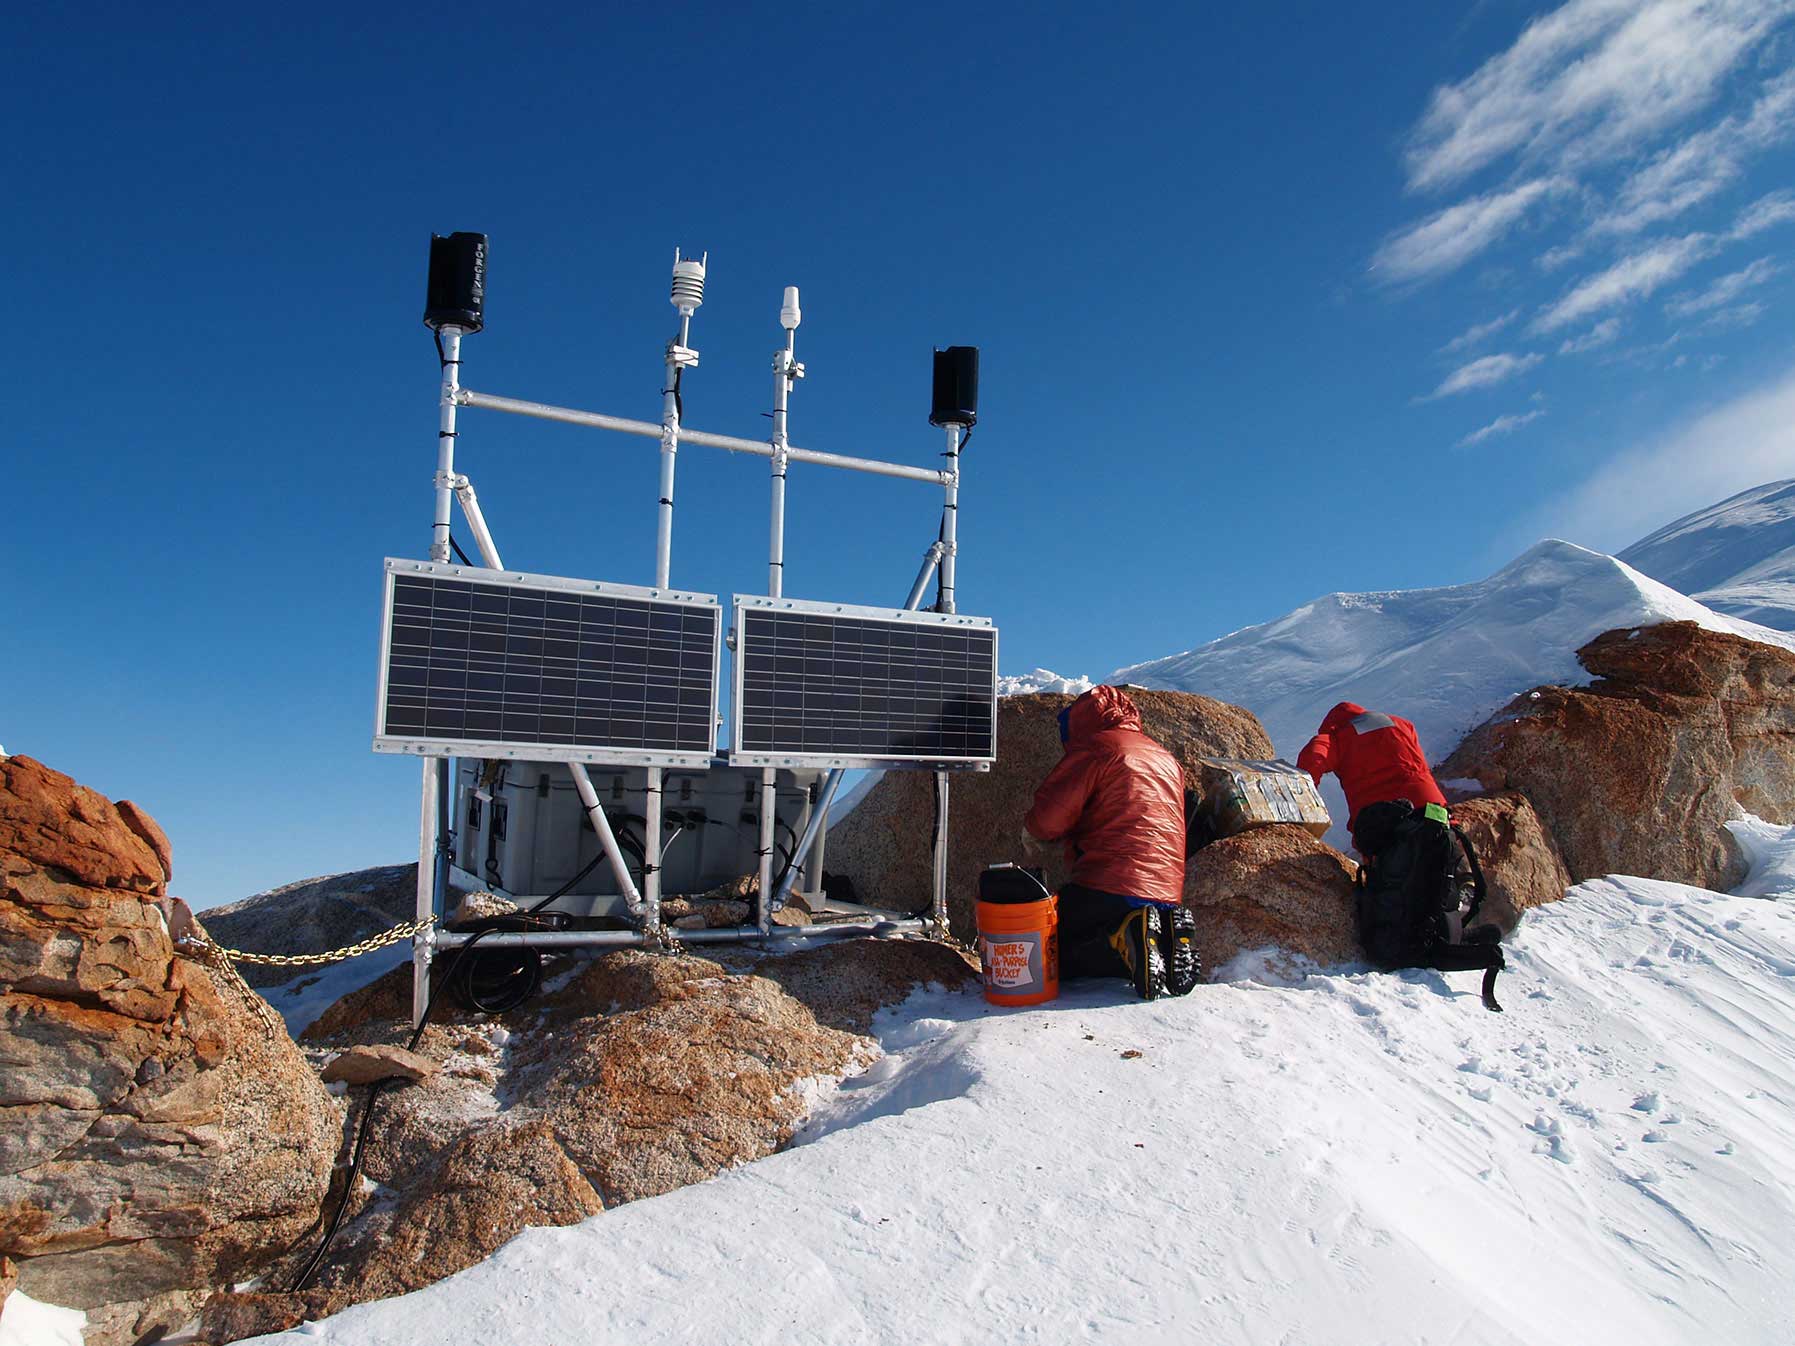 Genasun controllers attached to solar panels in snowy Arctic, suitable for harsh weather conditions with C1D2 classification